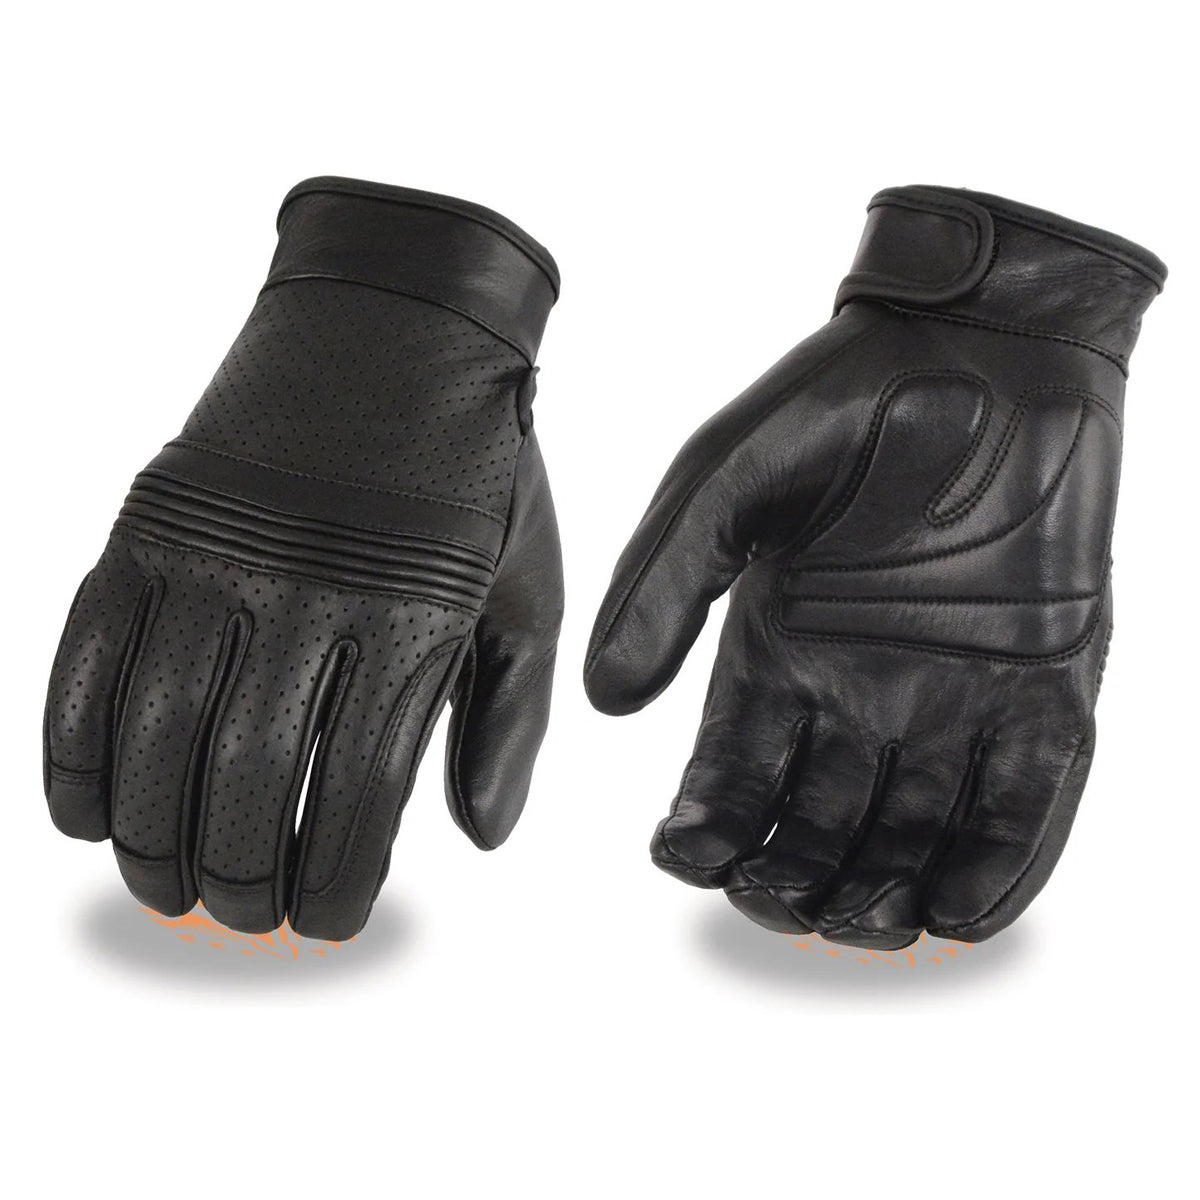 Men's Black Leather ’I - Touchscreen Compatible’ Gel Palm Motorcycle Hand Gloves W/ Flex Knuckles